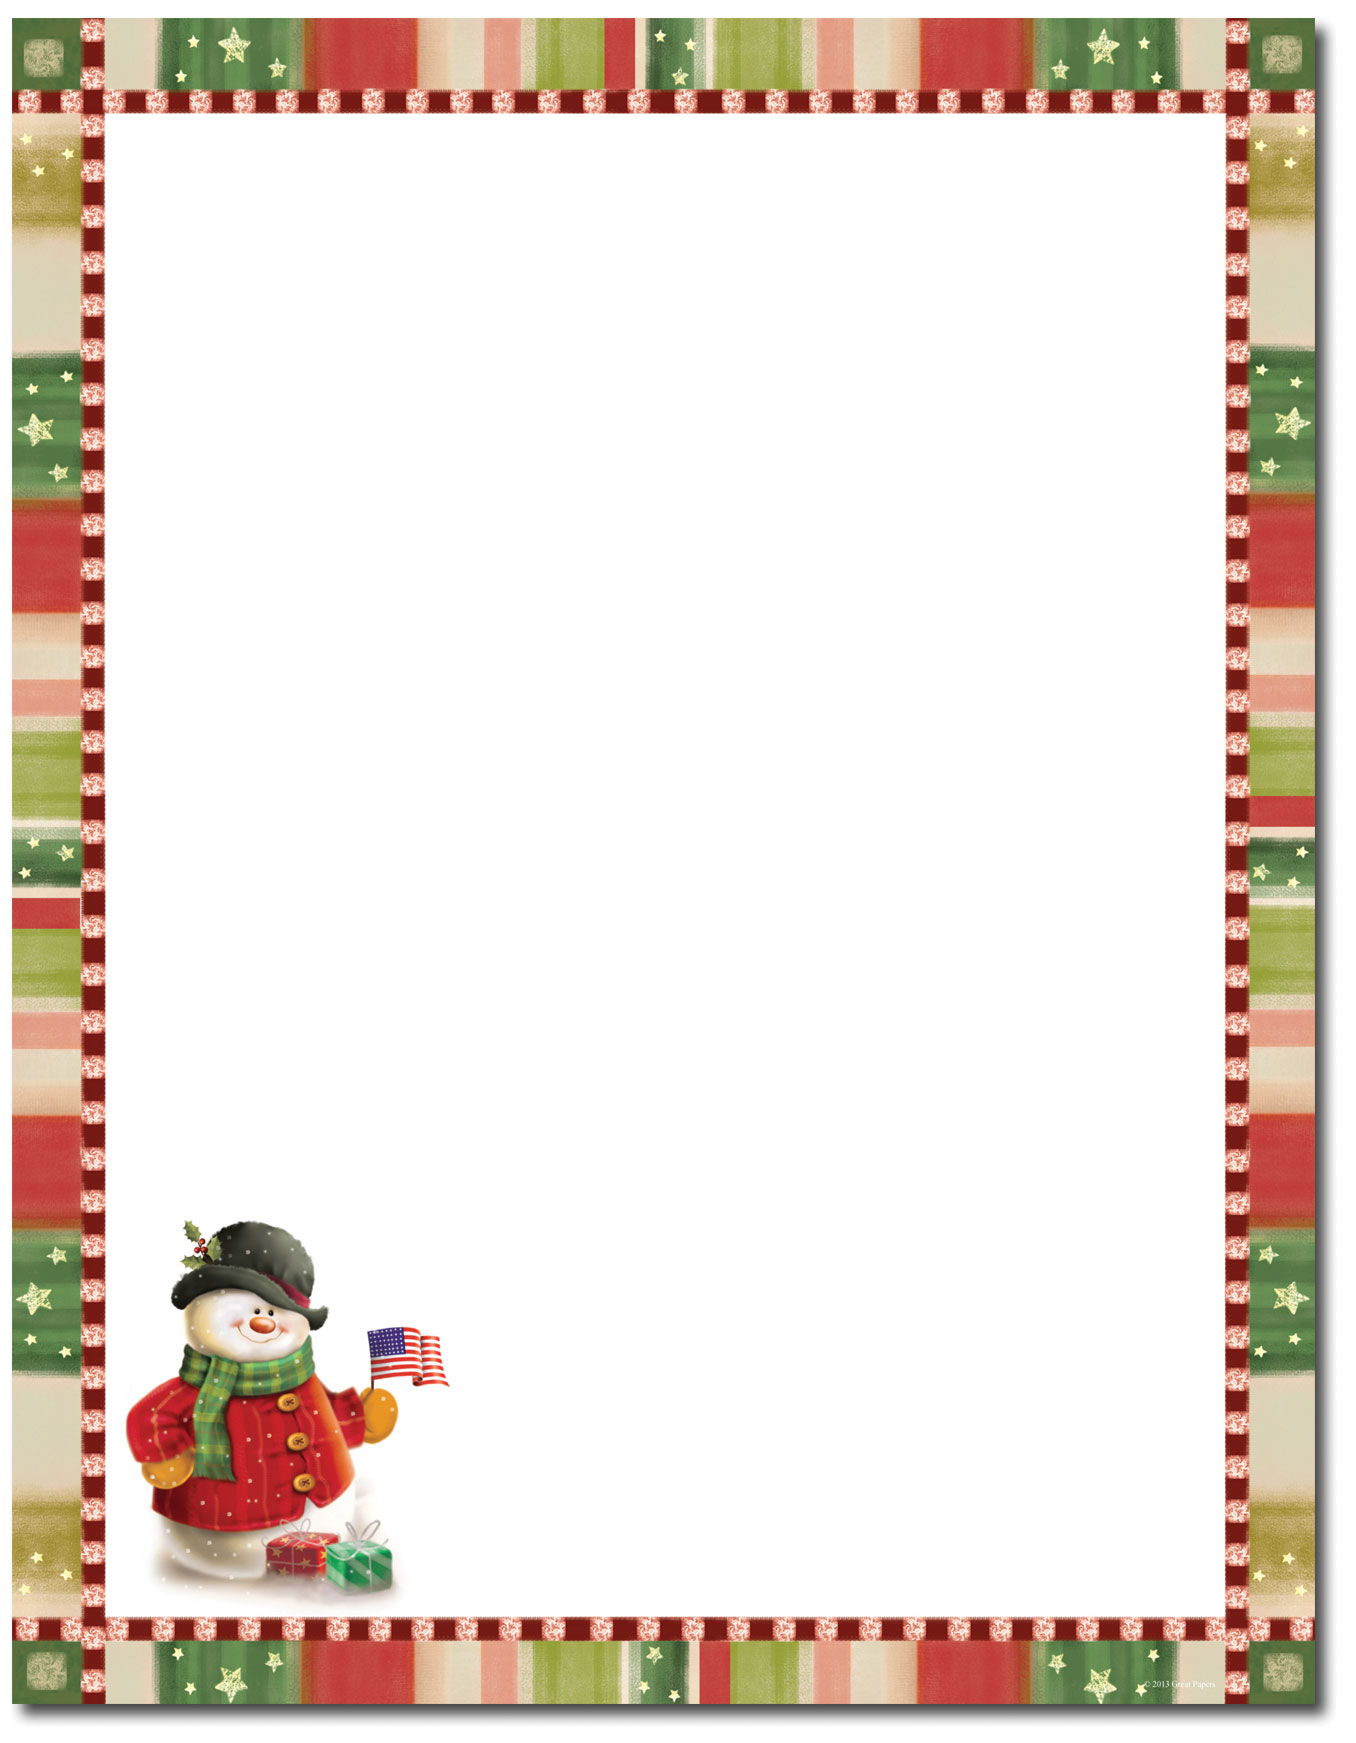 Lacy Tree Stationery Letterhead Christmas Stationery